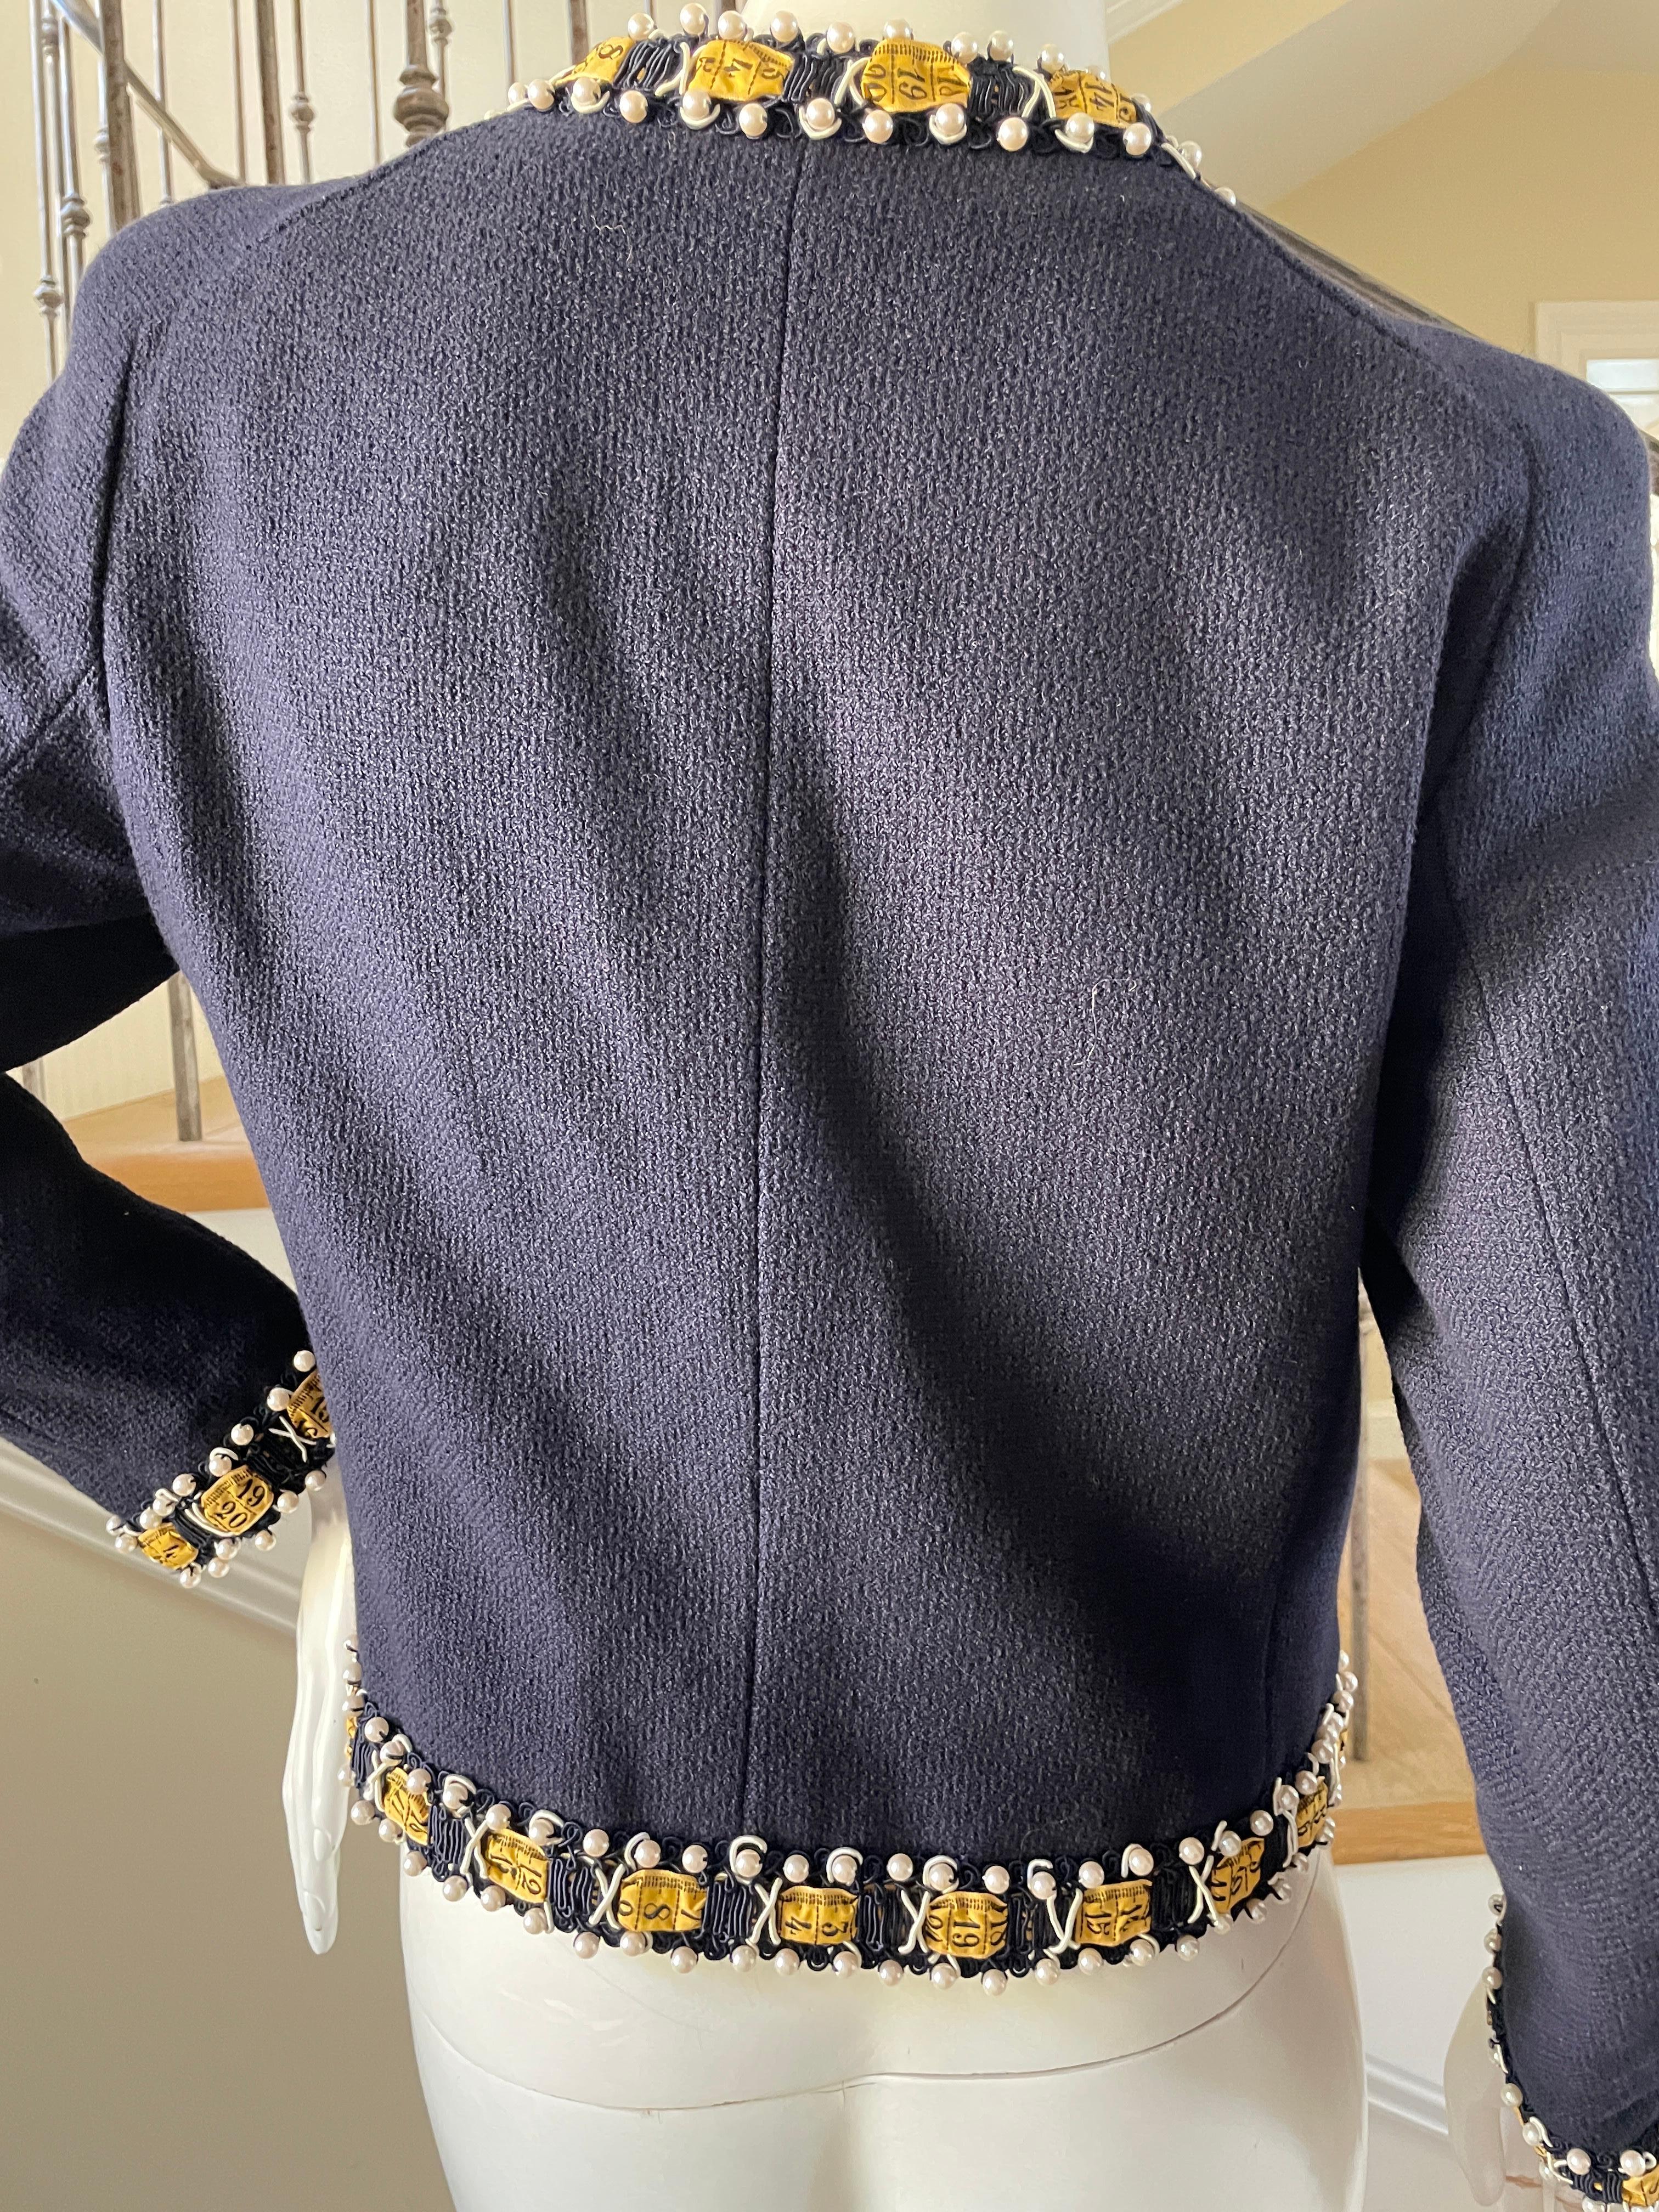 Moschino Vintage 80's Sewing Kit Embellished Blue Boucle Jacket For Sale 1